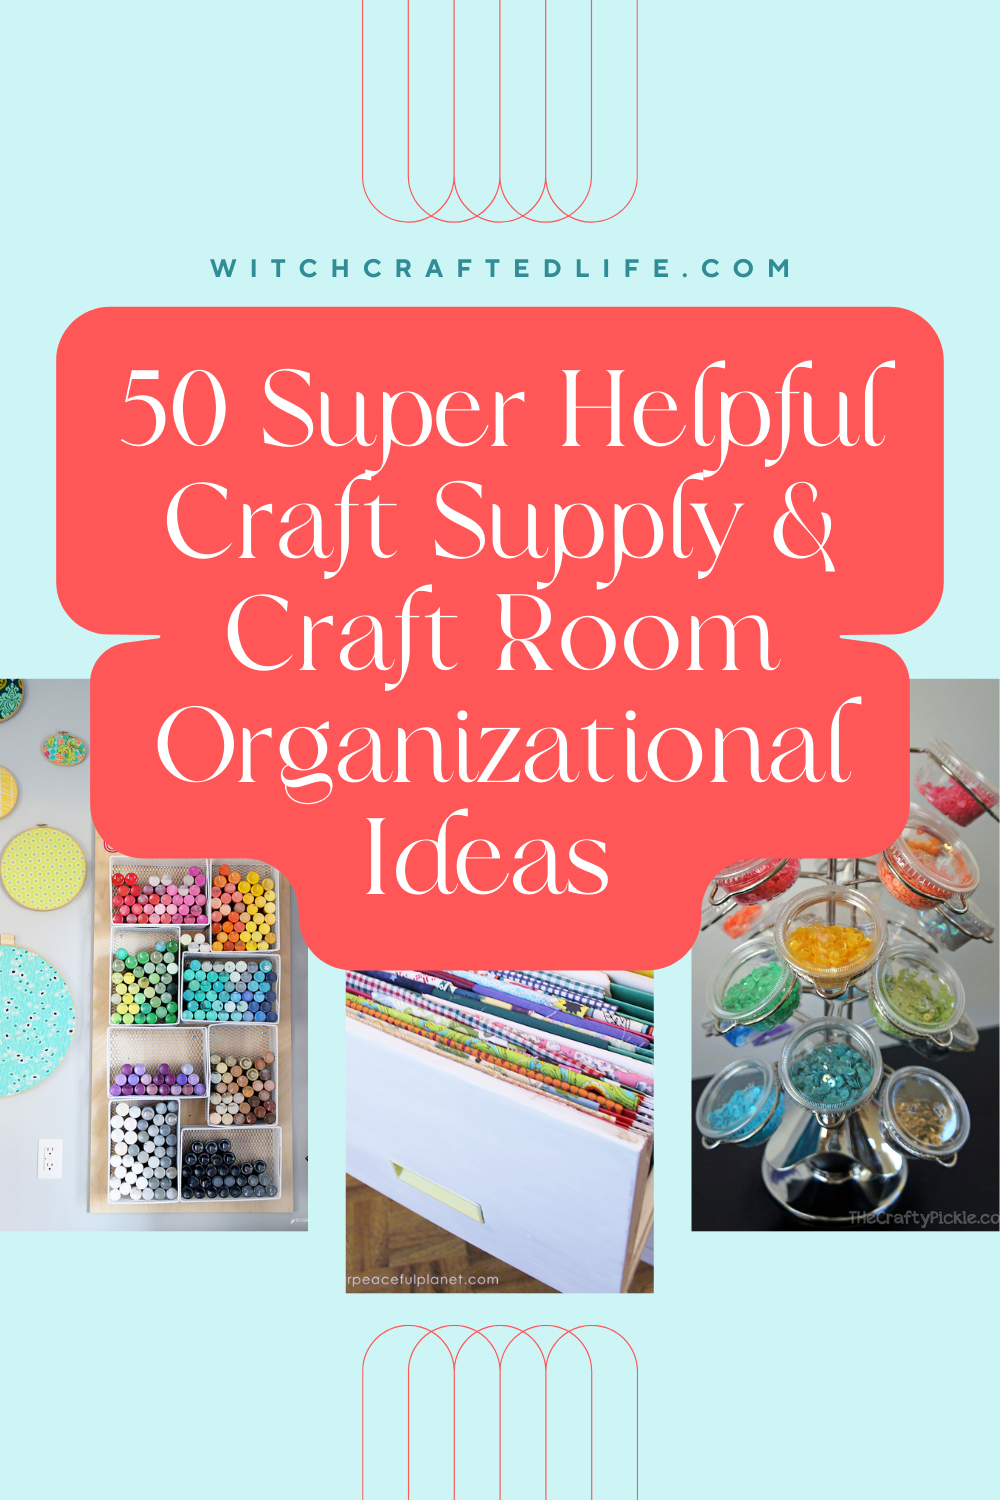 https://witchcraftedlife.com/wp-content/uploads/2022/04/50-Super-Helpful-Craft-Supply-and-Craft-Room-Organizational-Ideas-683x1024@2x.png